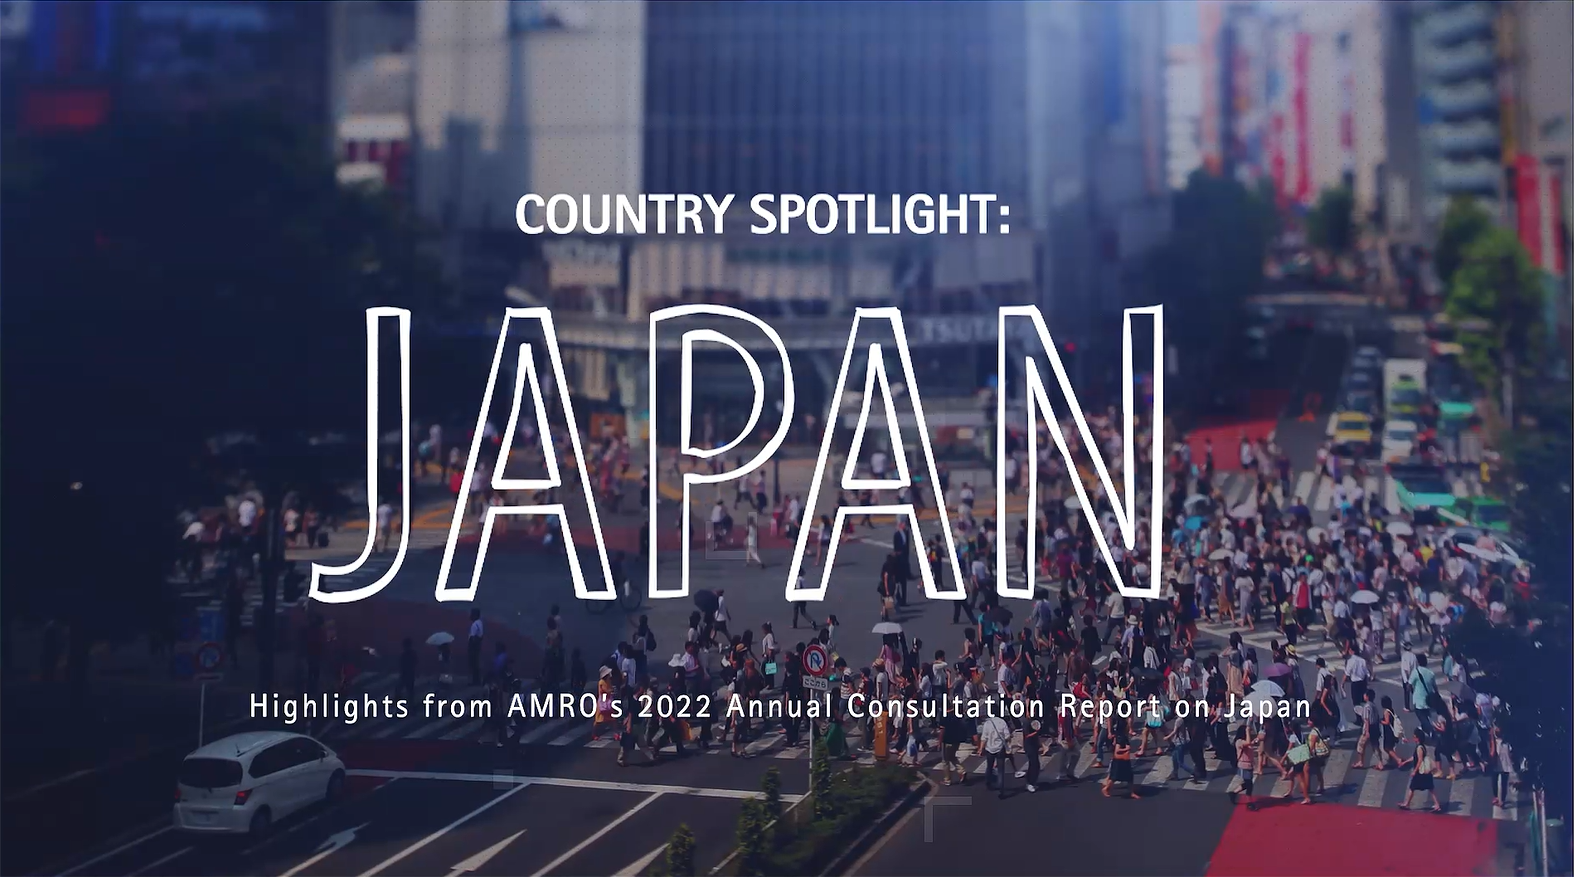 Japan Annual Consultation Report highlights